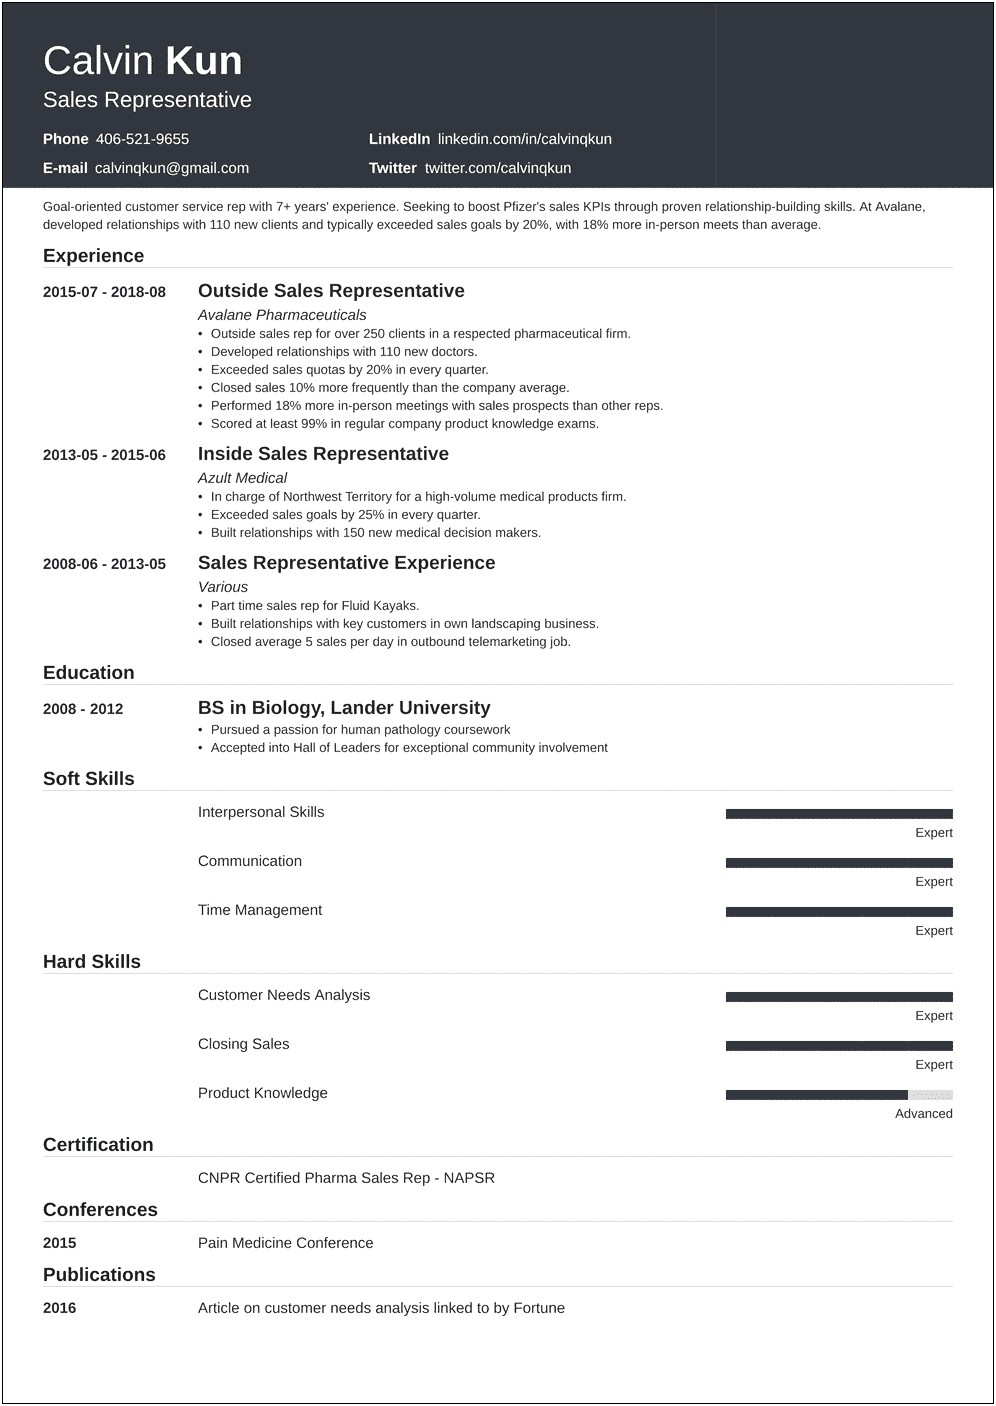 Resume Samples For Experienced Professionals In Sales